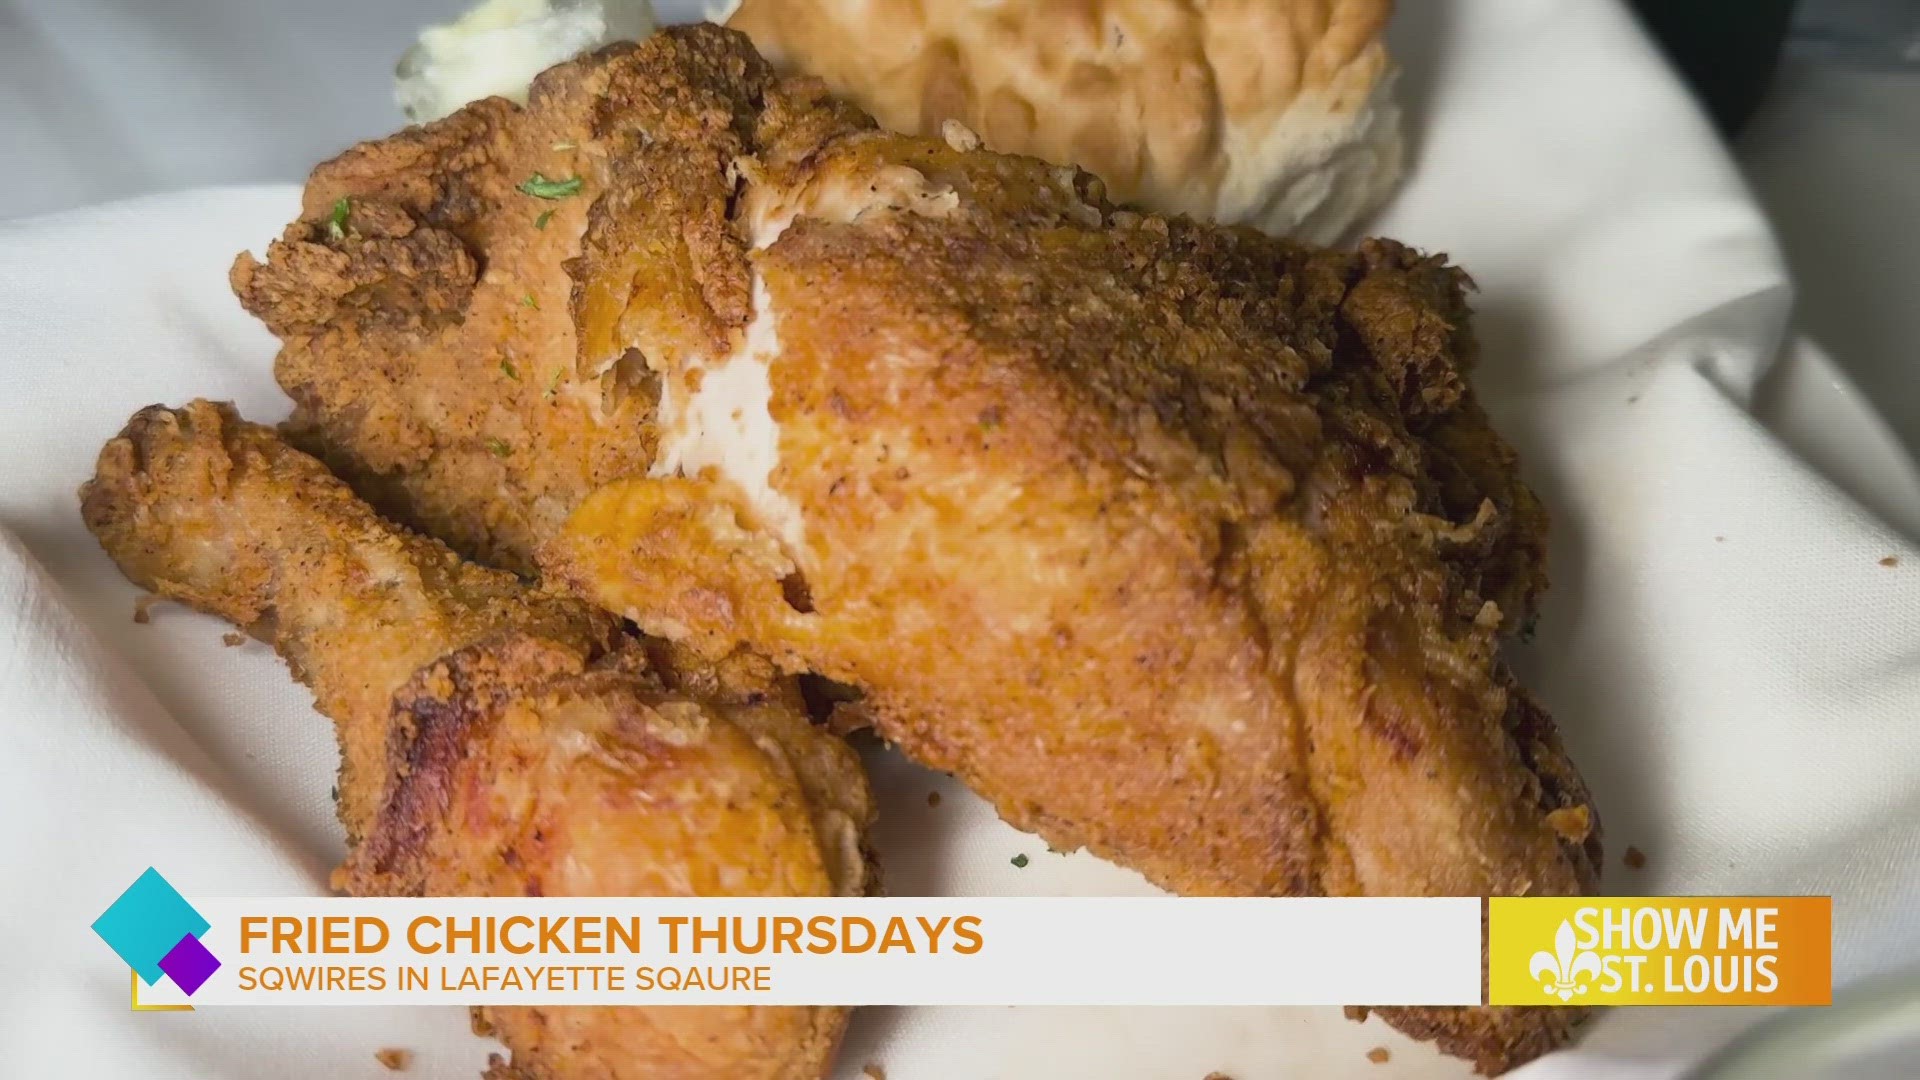 Thursdays are for fried chicken over at SqWires Restaurant and Market.